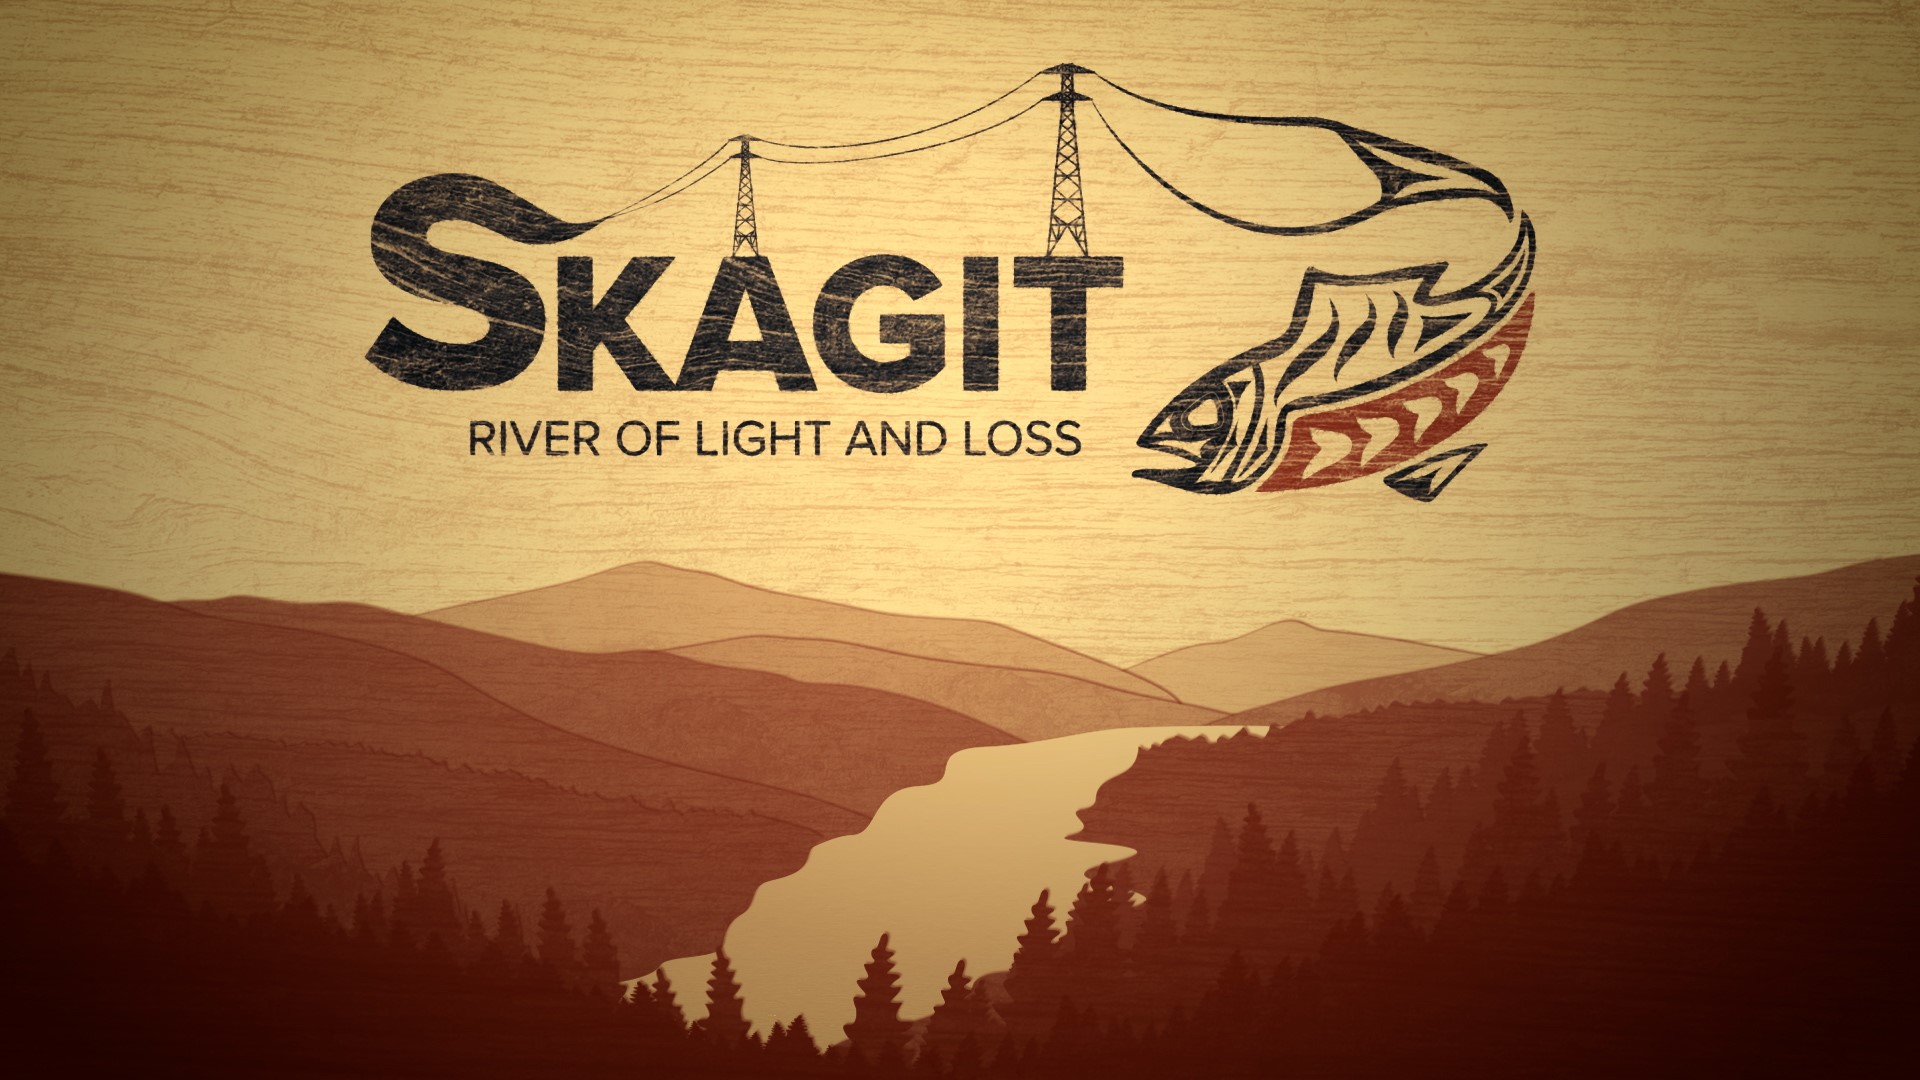 KING 5 Investigator Susannah Frame explores the environmental and cultural impacts of Seattle City Light's use of the Skagit River to generate electricity